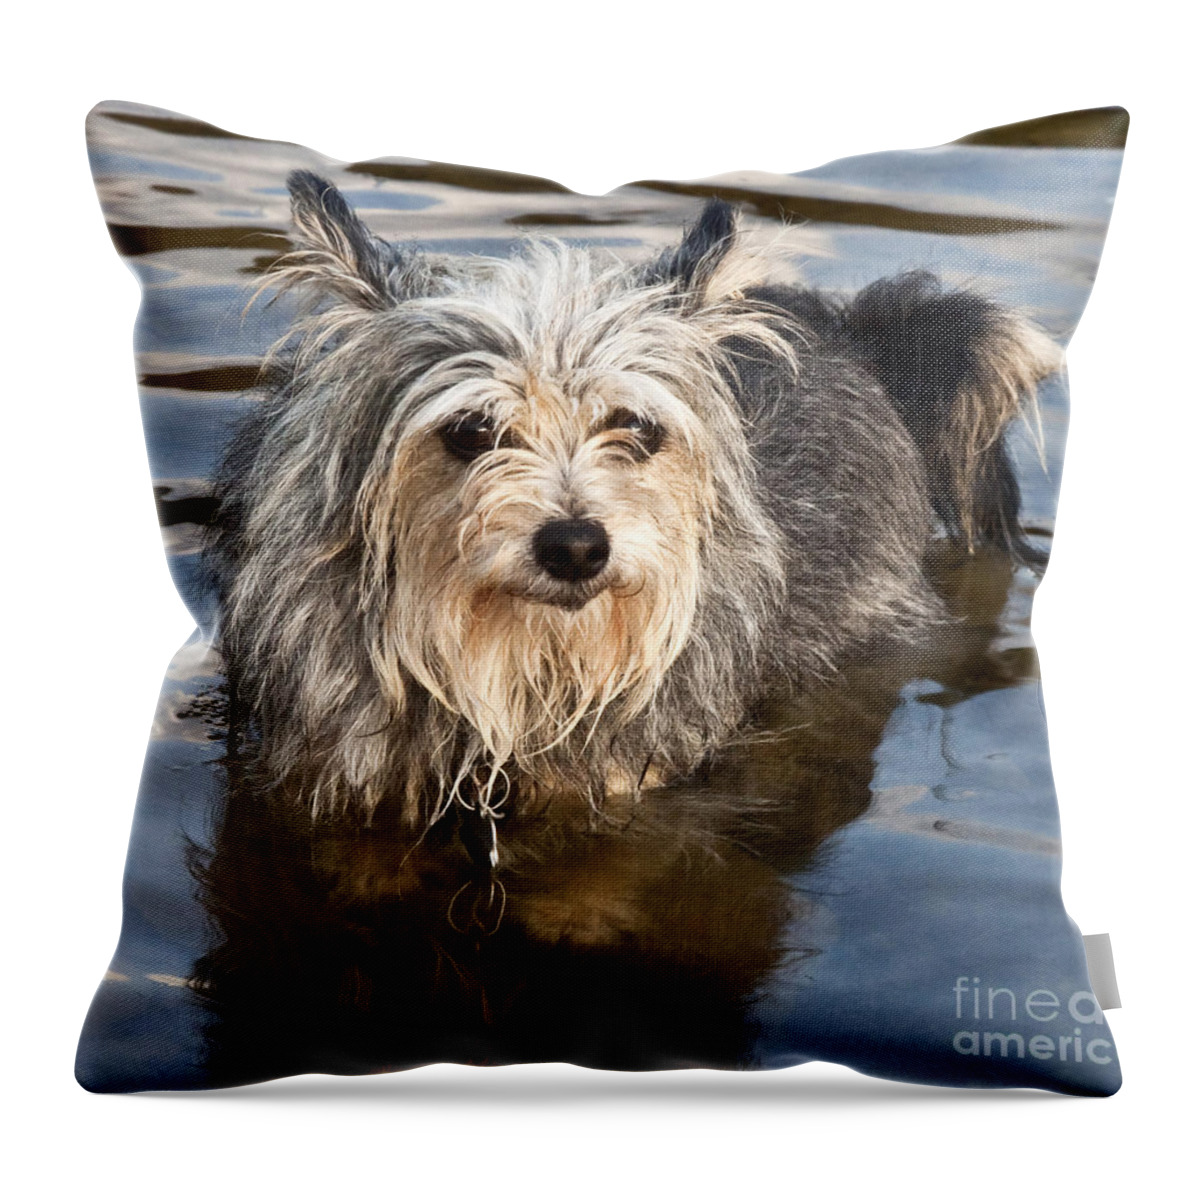 Gremlin Throw Pillow featuring the photograph Gremlin by Jeannette Hunt